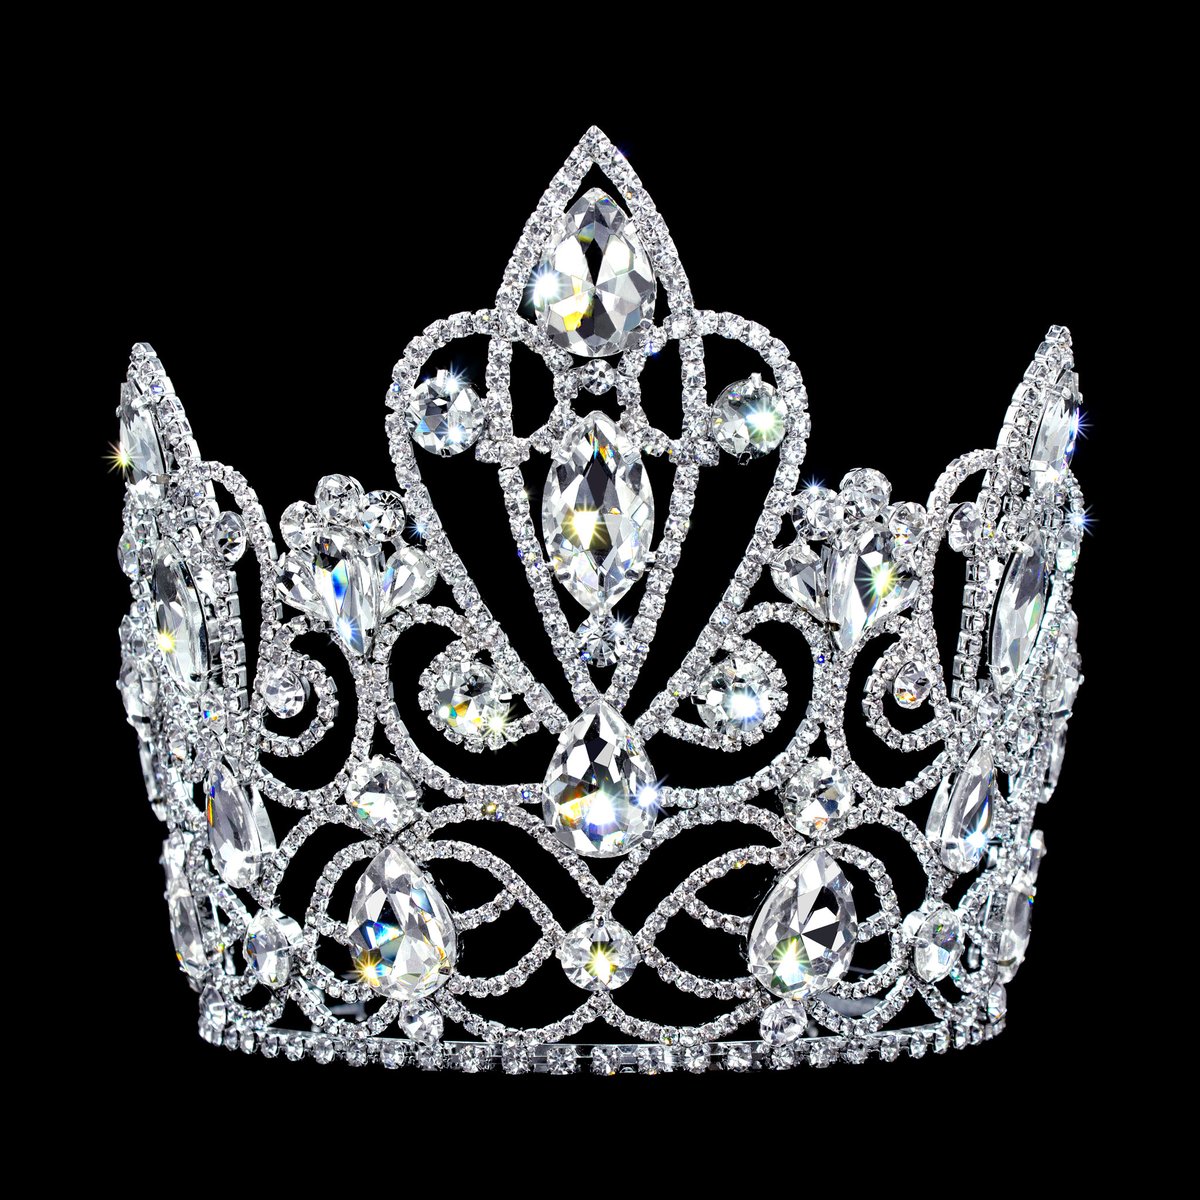 #17377 - The Serenity Tiara with Combs - 5.75' Tall
rhinestonejewelry.com/products/17377…
#Pageant #PageantCrown #RhinestoneJewelry